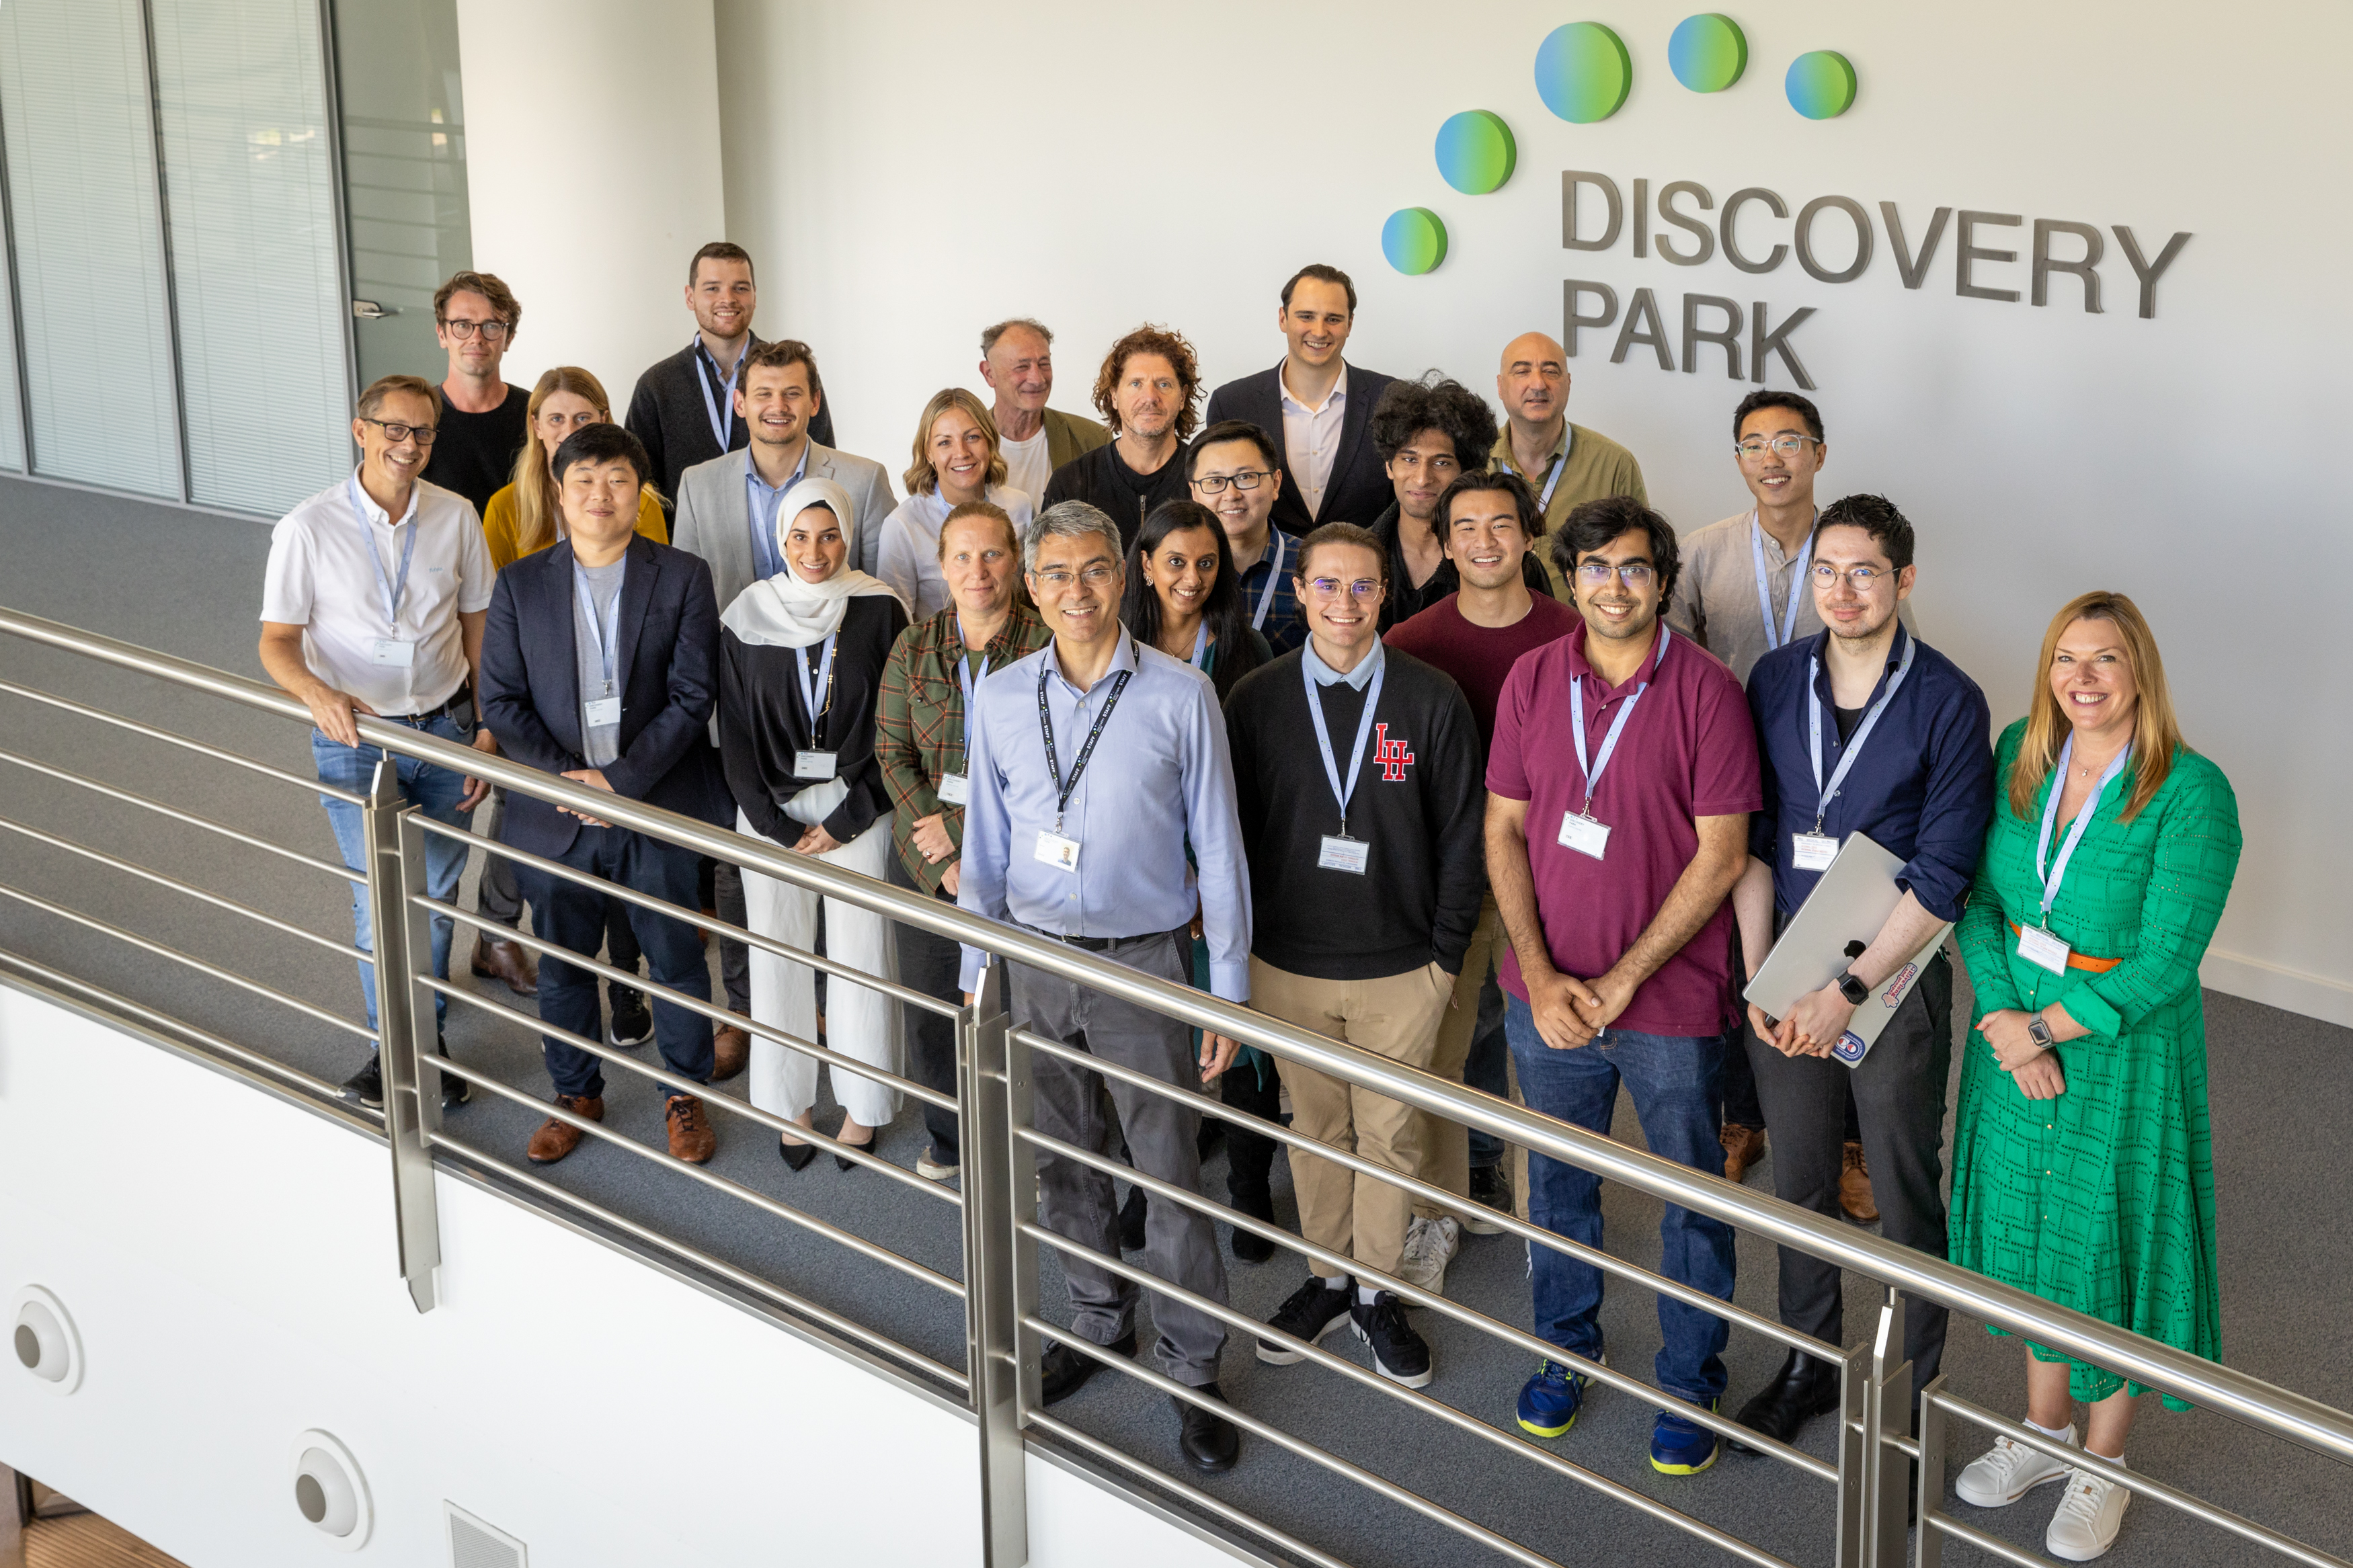 Renos Savva Head of Innovation at Discovery Park with the first cohort of Discovery Spark